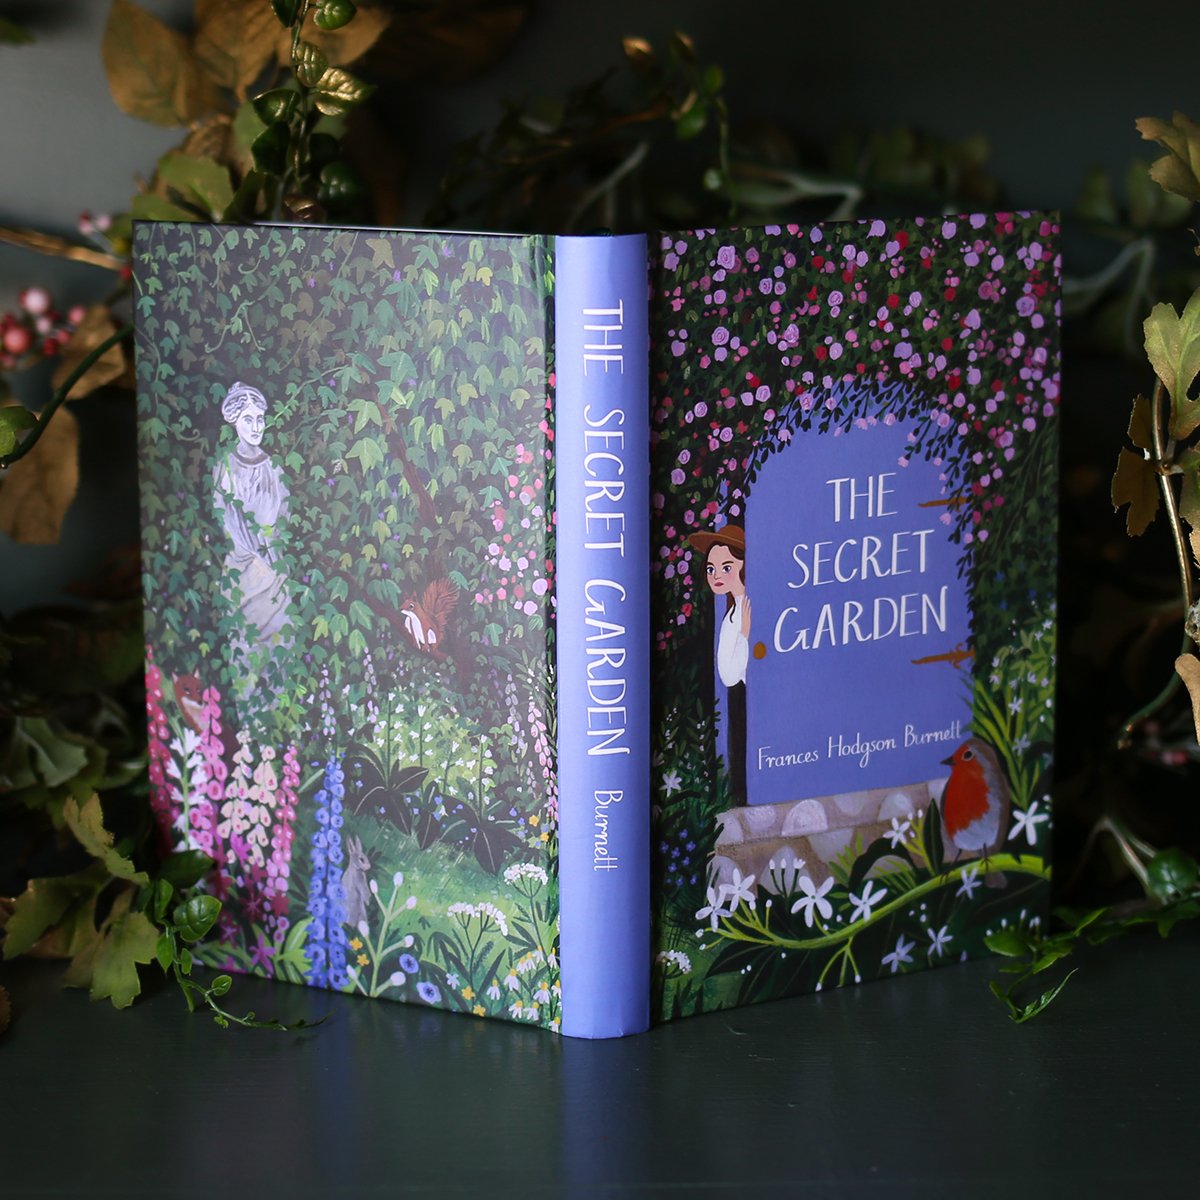 The Secret Garden special edition with a custom cover with purple flowers and garden scene